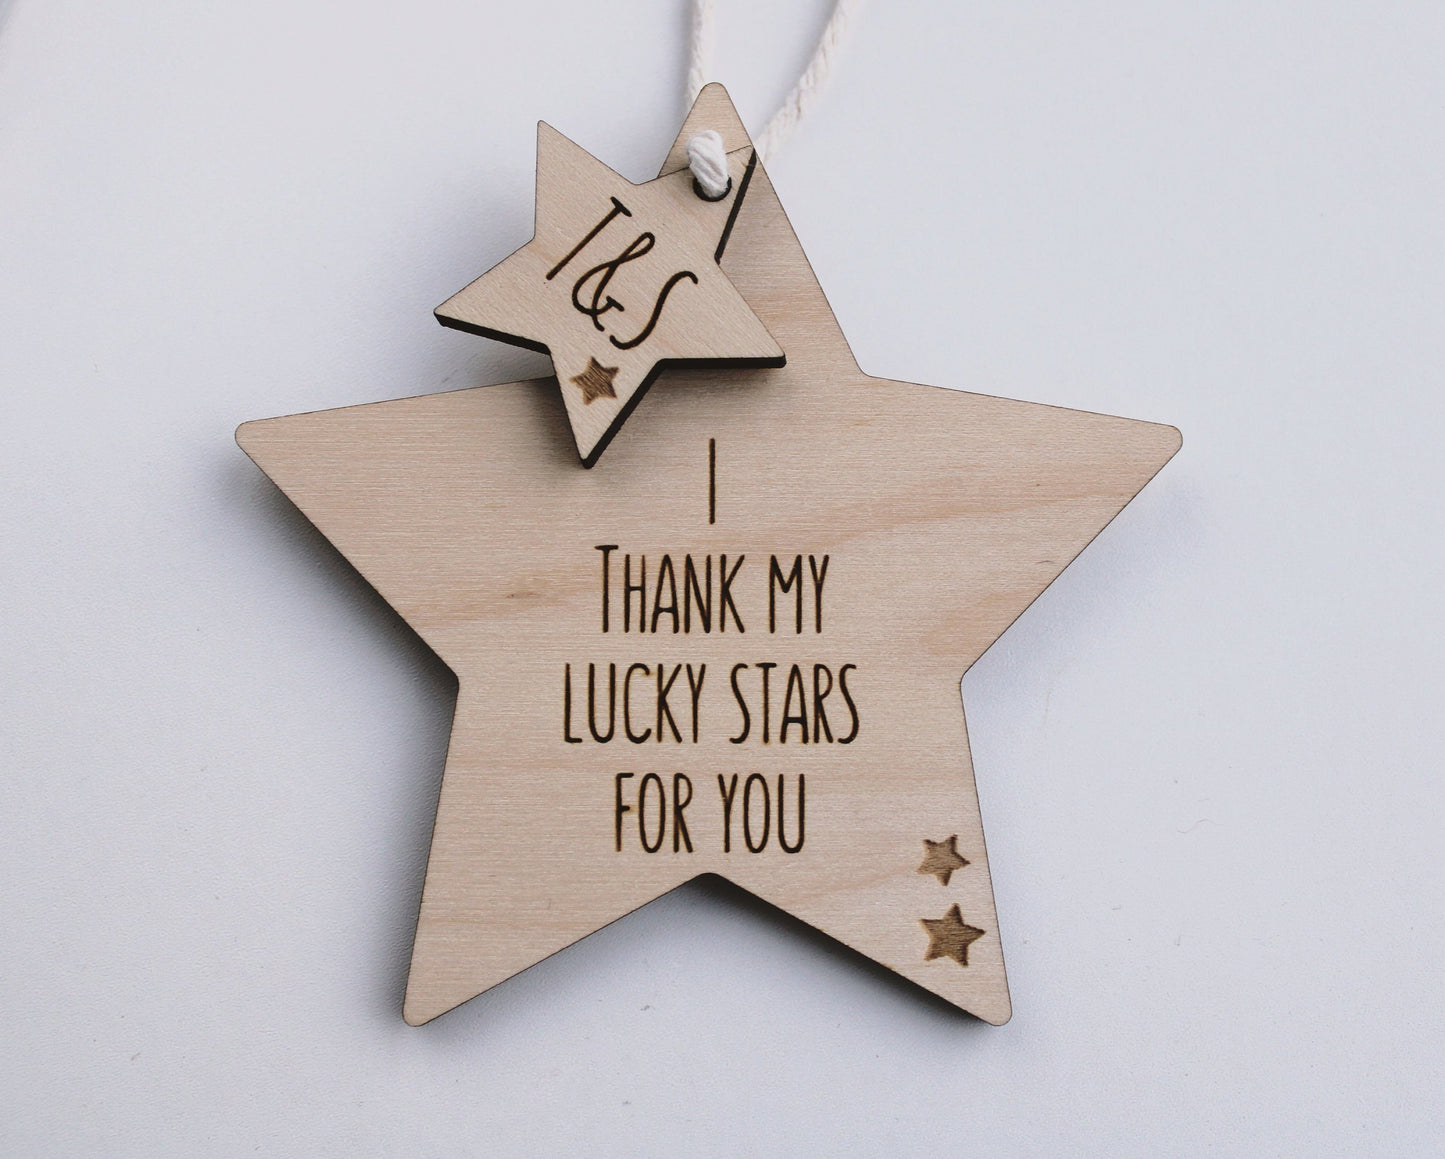 Star decoration - 'I Thank My Lucky Stars For You'